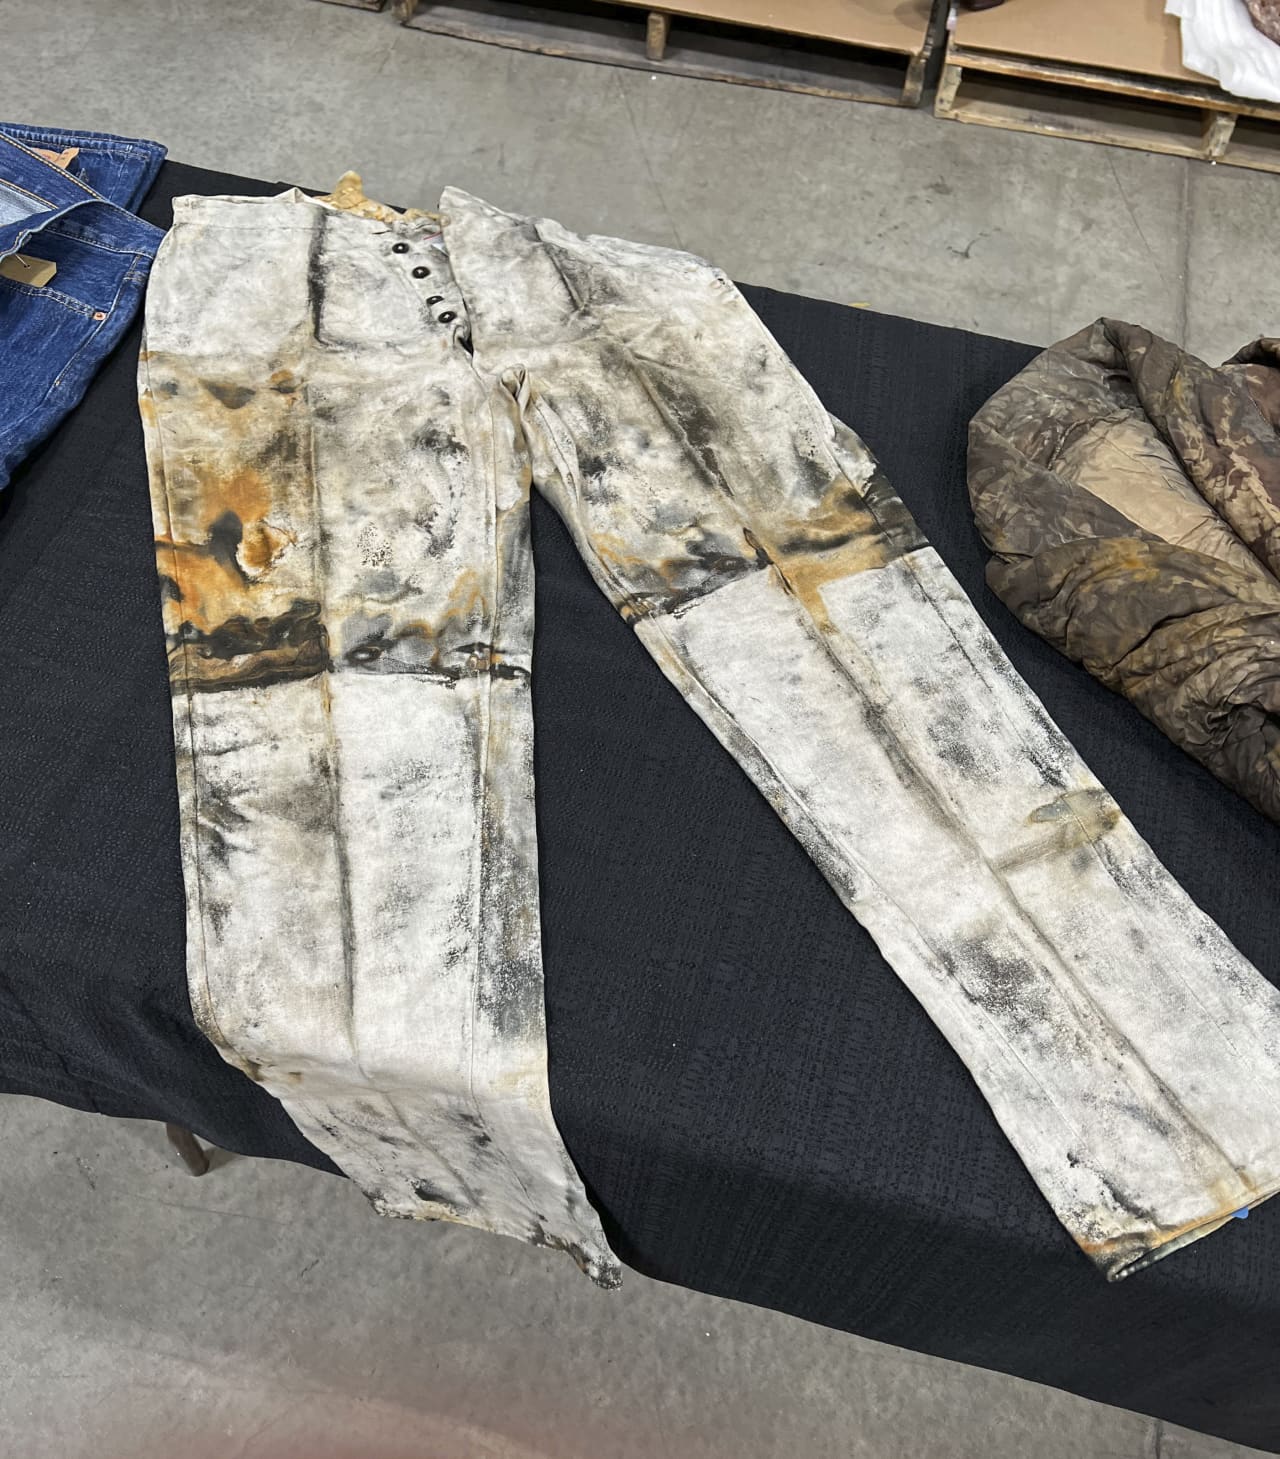 Oldest known pair of jeans in the world sold for $114,000 - MarketWatch